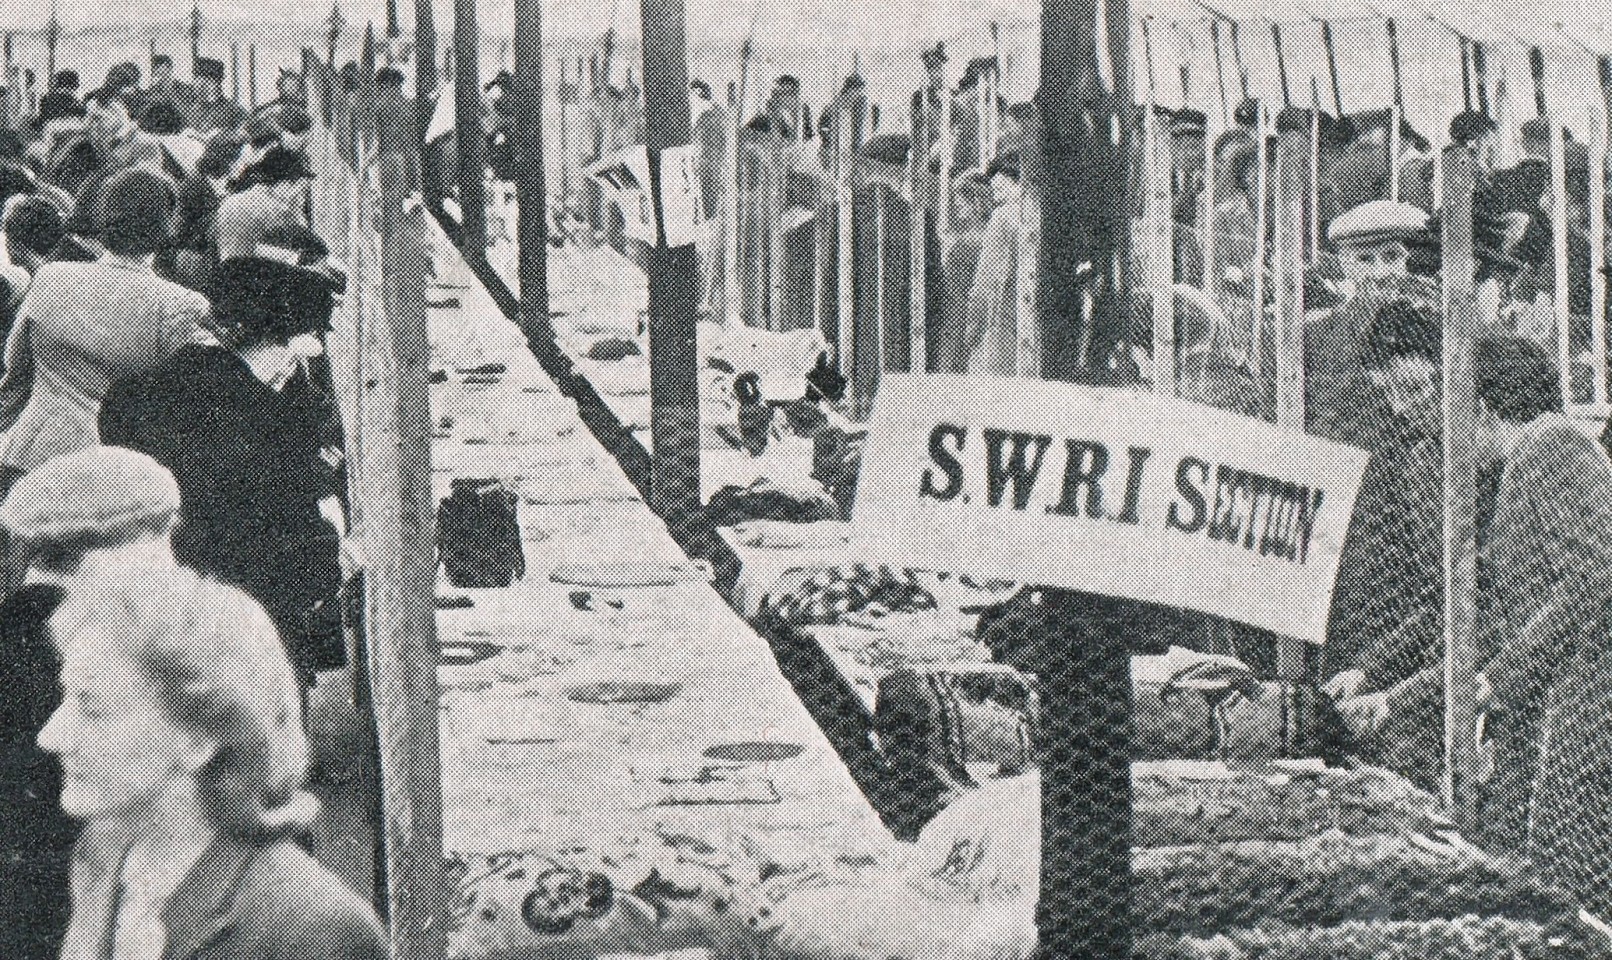 The SWRI tent at the 1948 Turriff Show